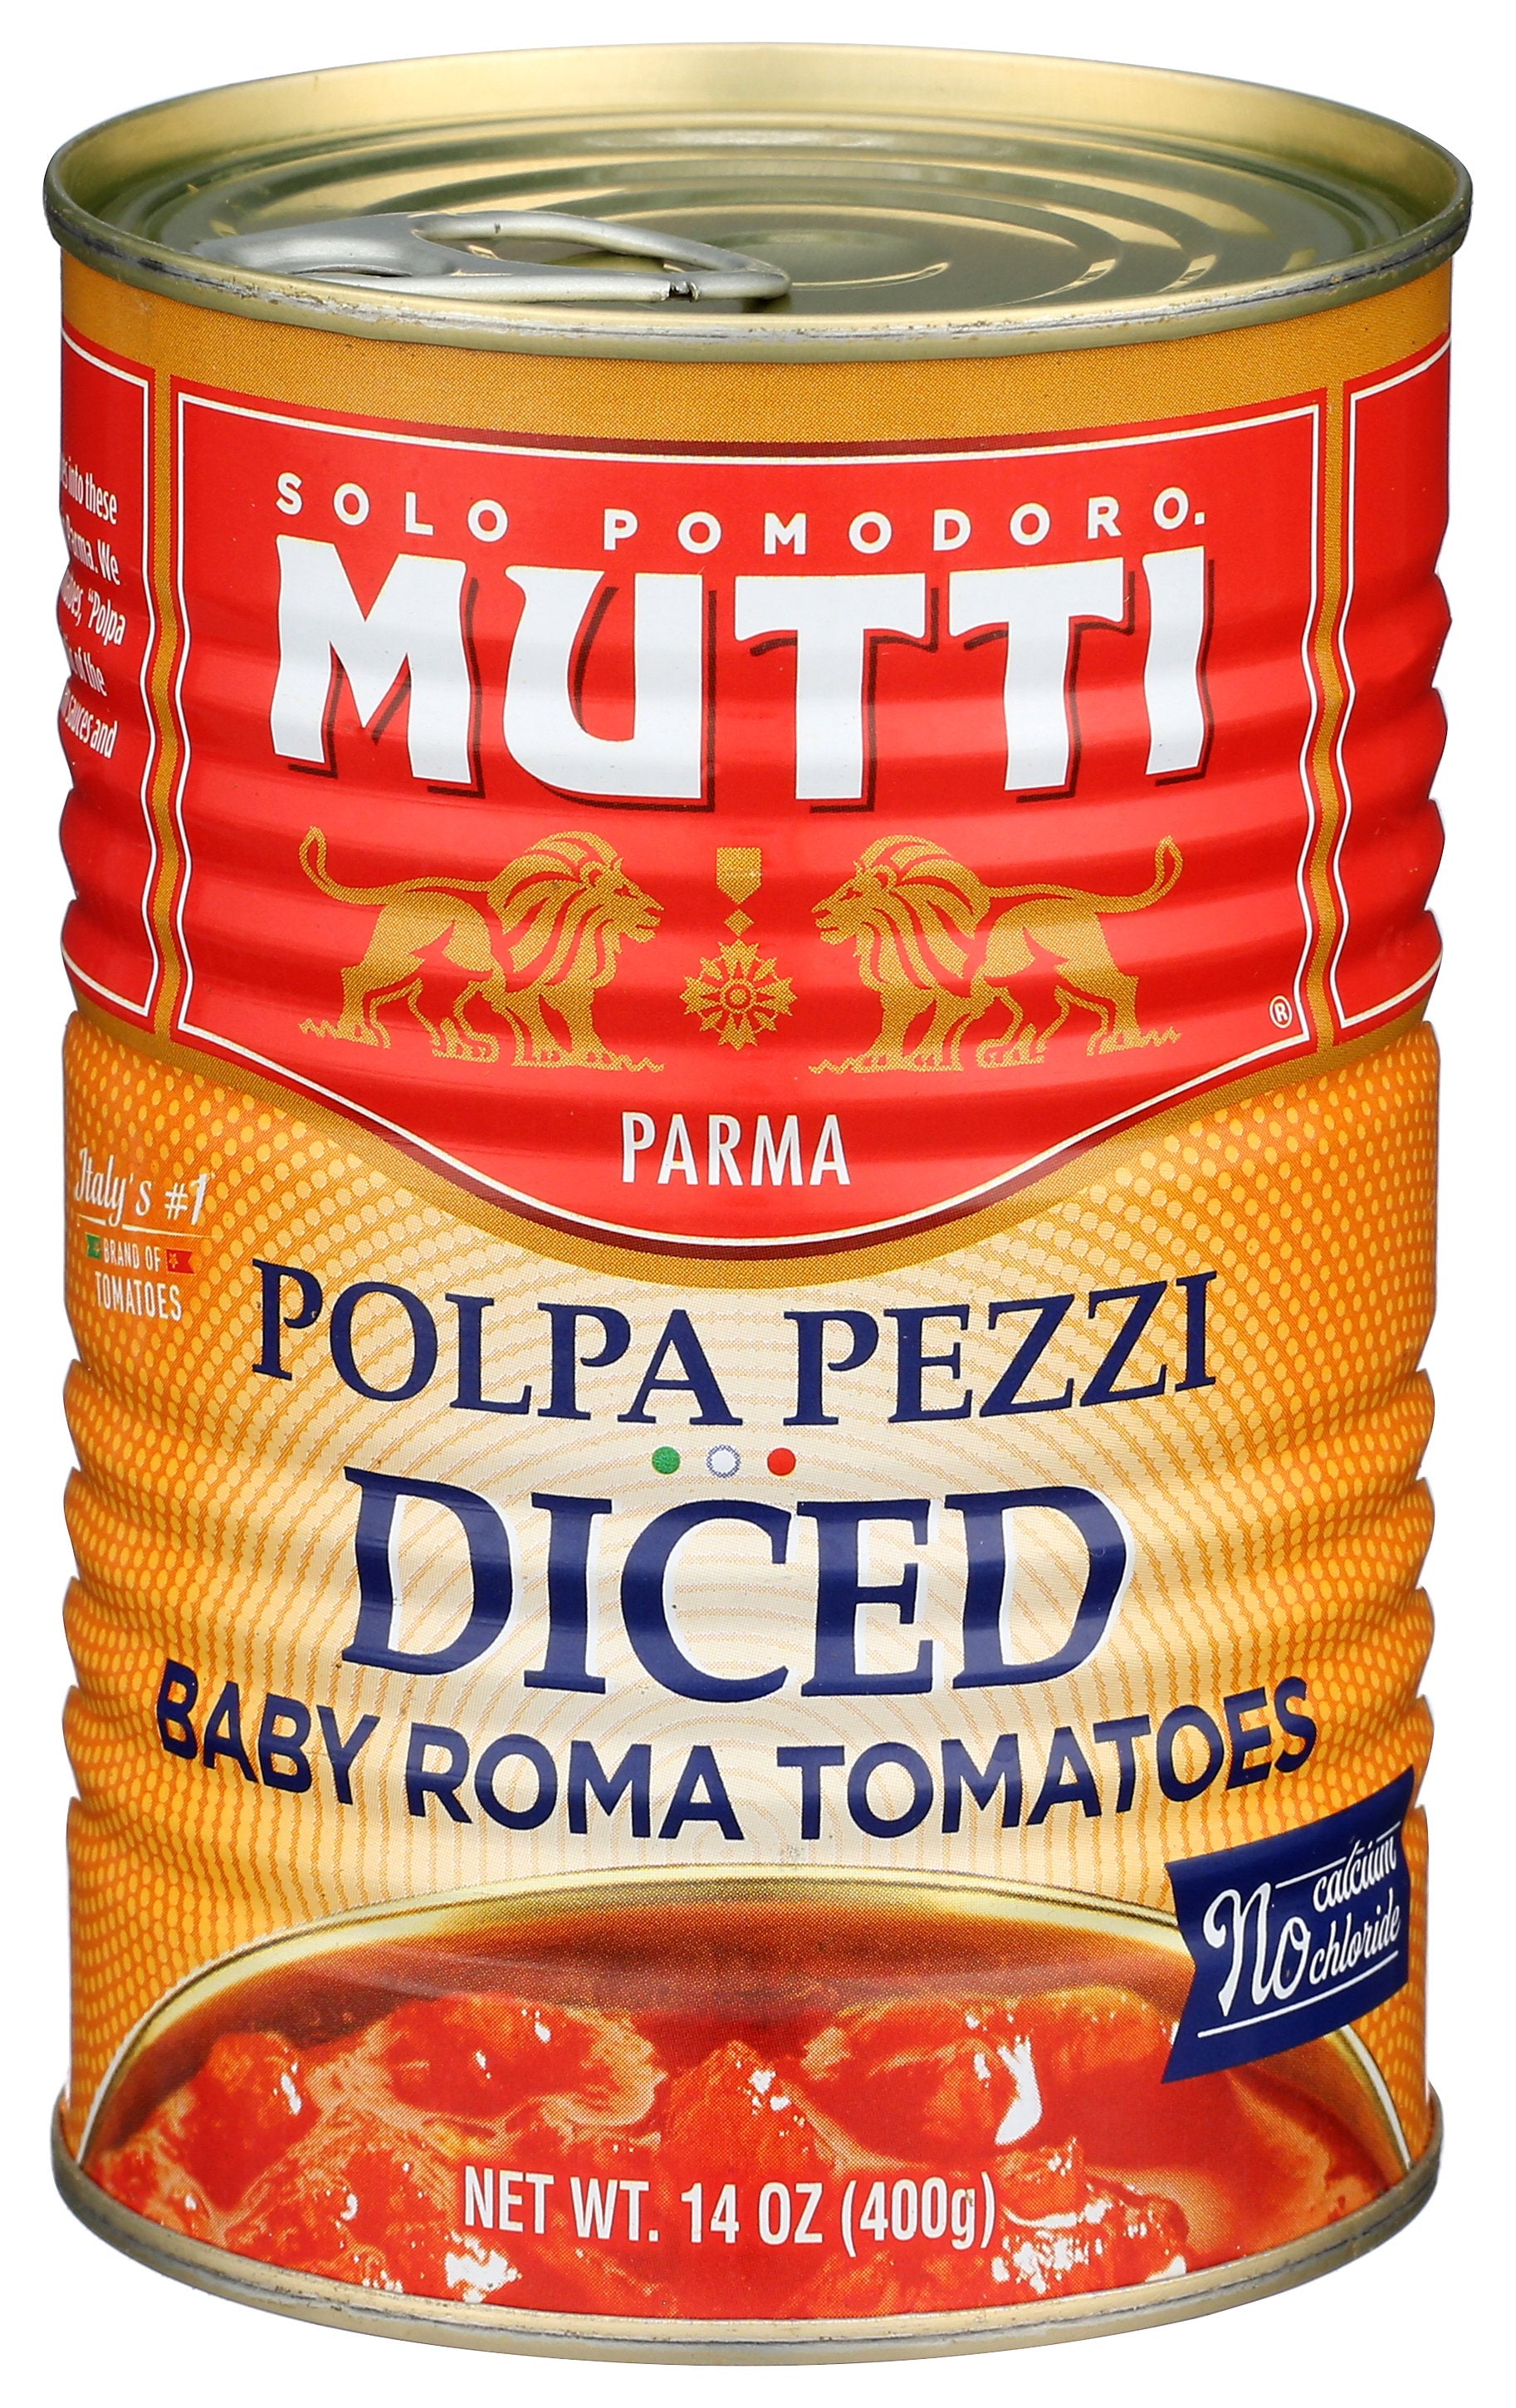 MUTTI TOMATO DICED BBY ROMA - Case of 6